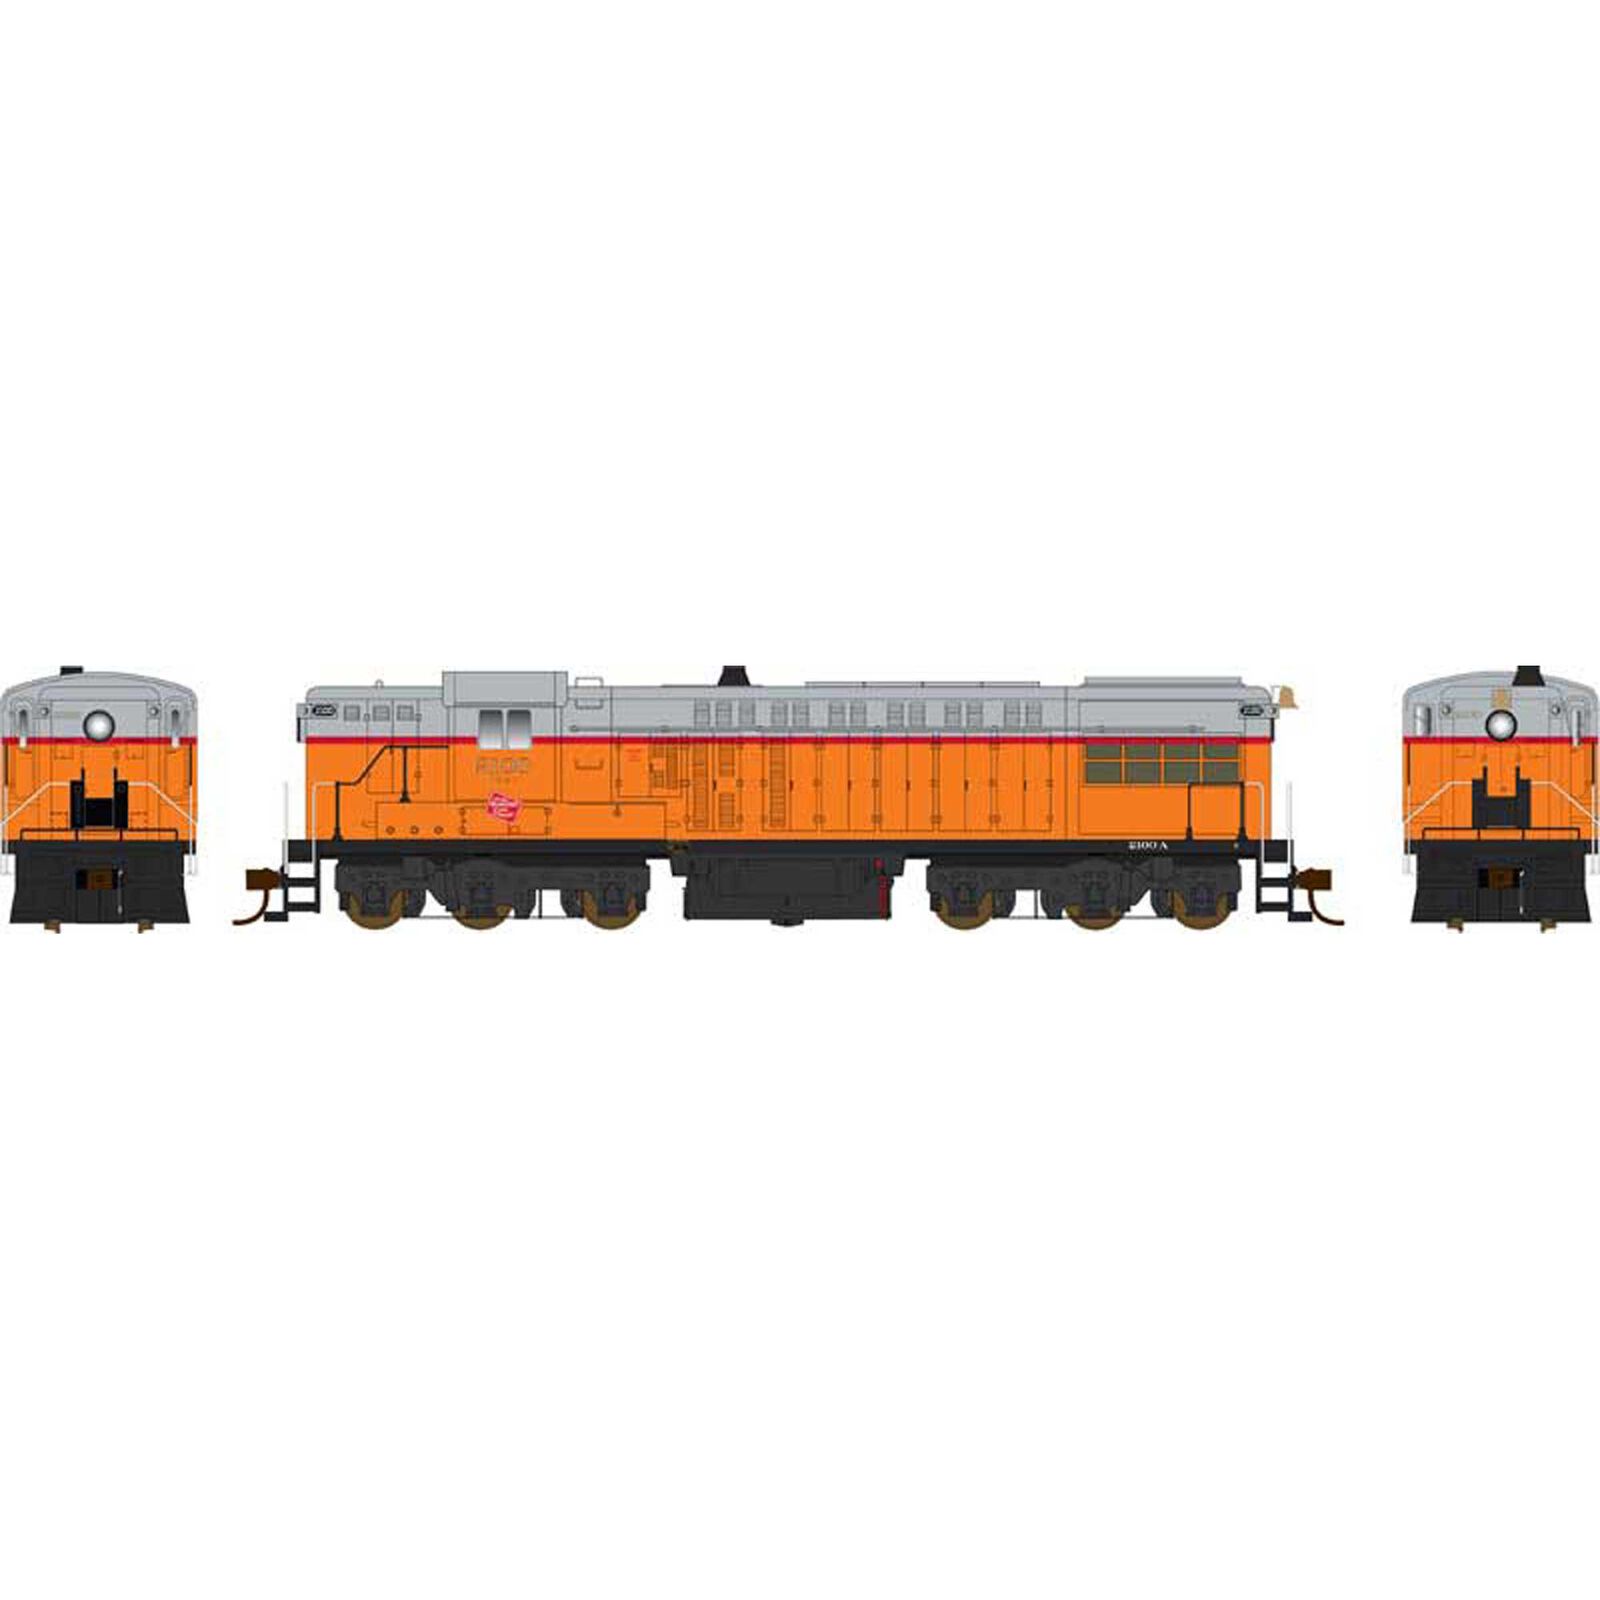 HO AS-616 MILW Loco #2101 with sound